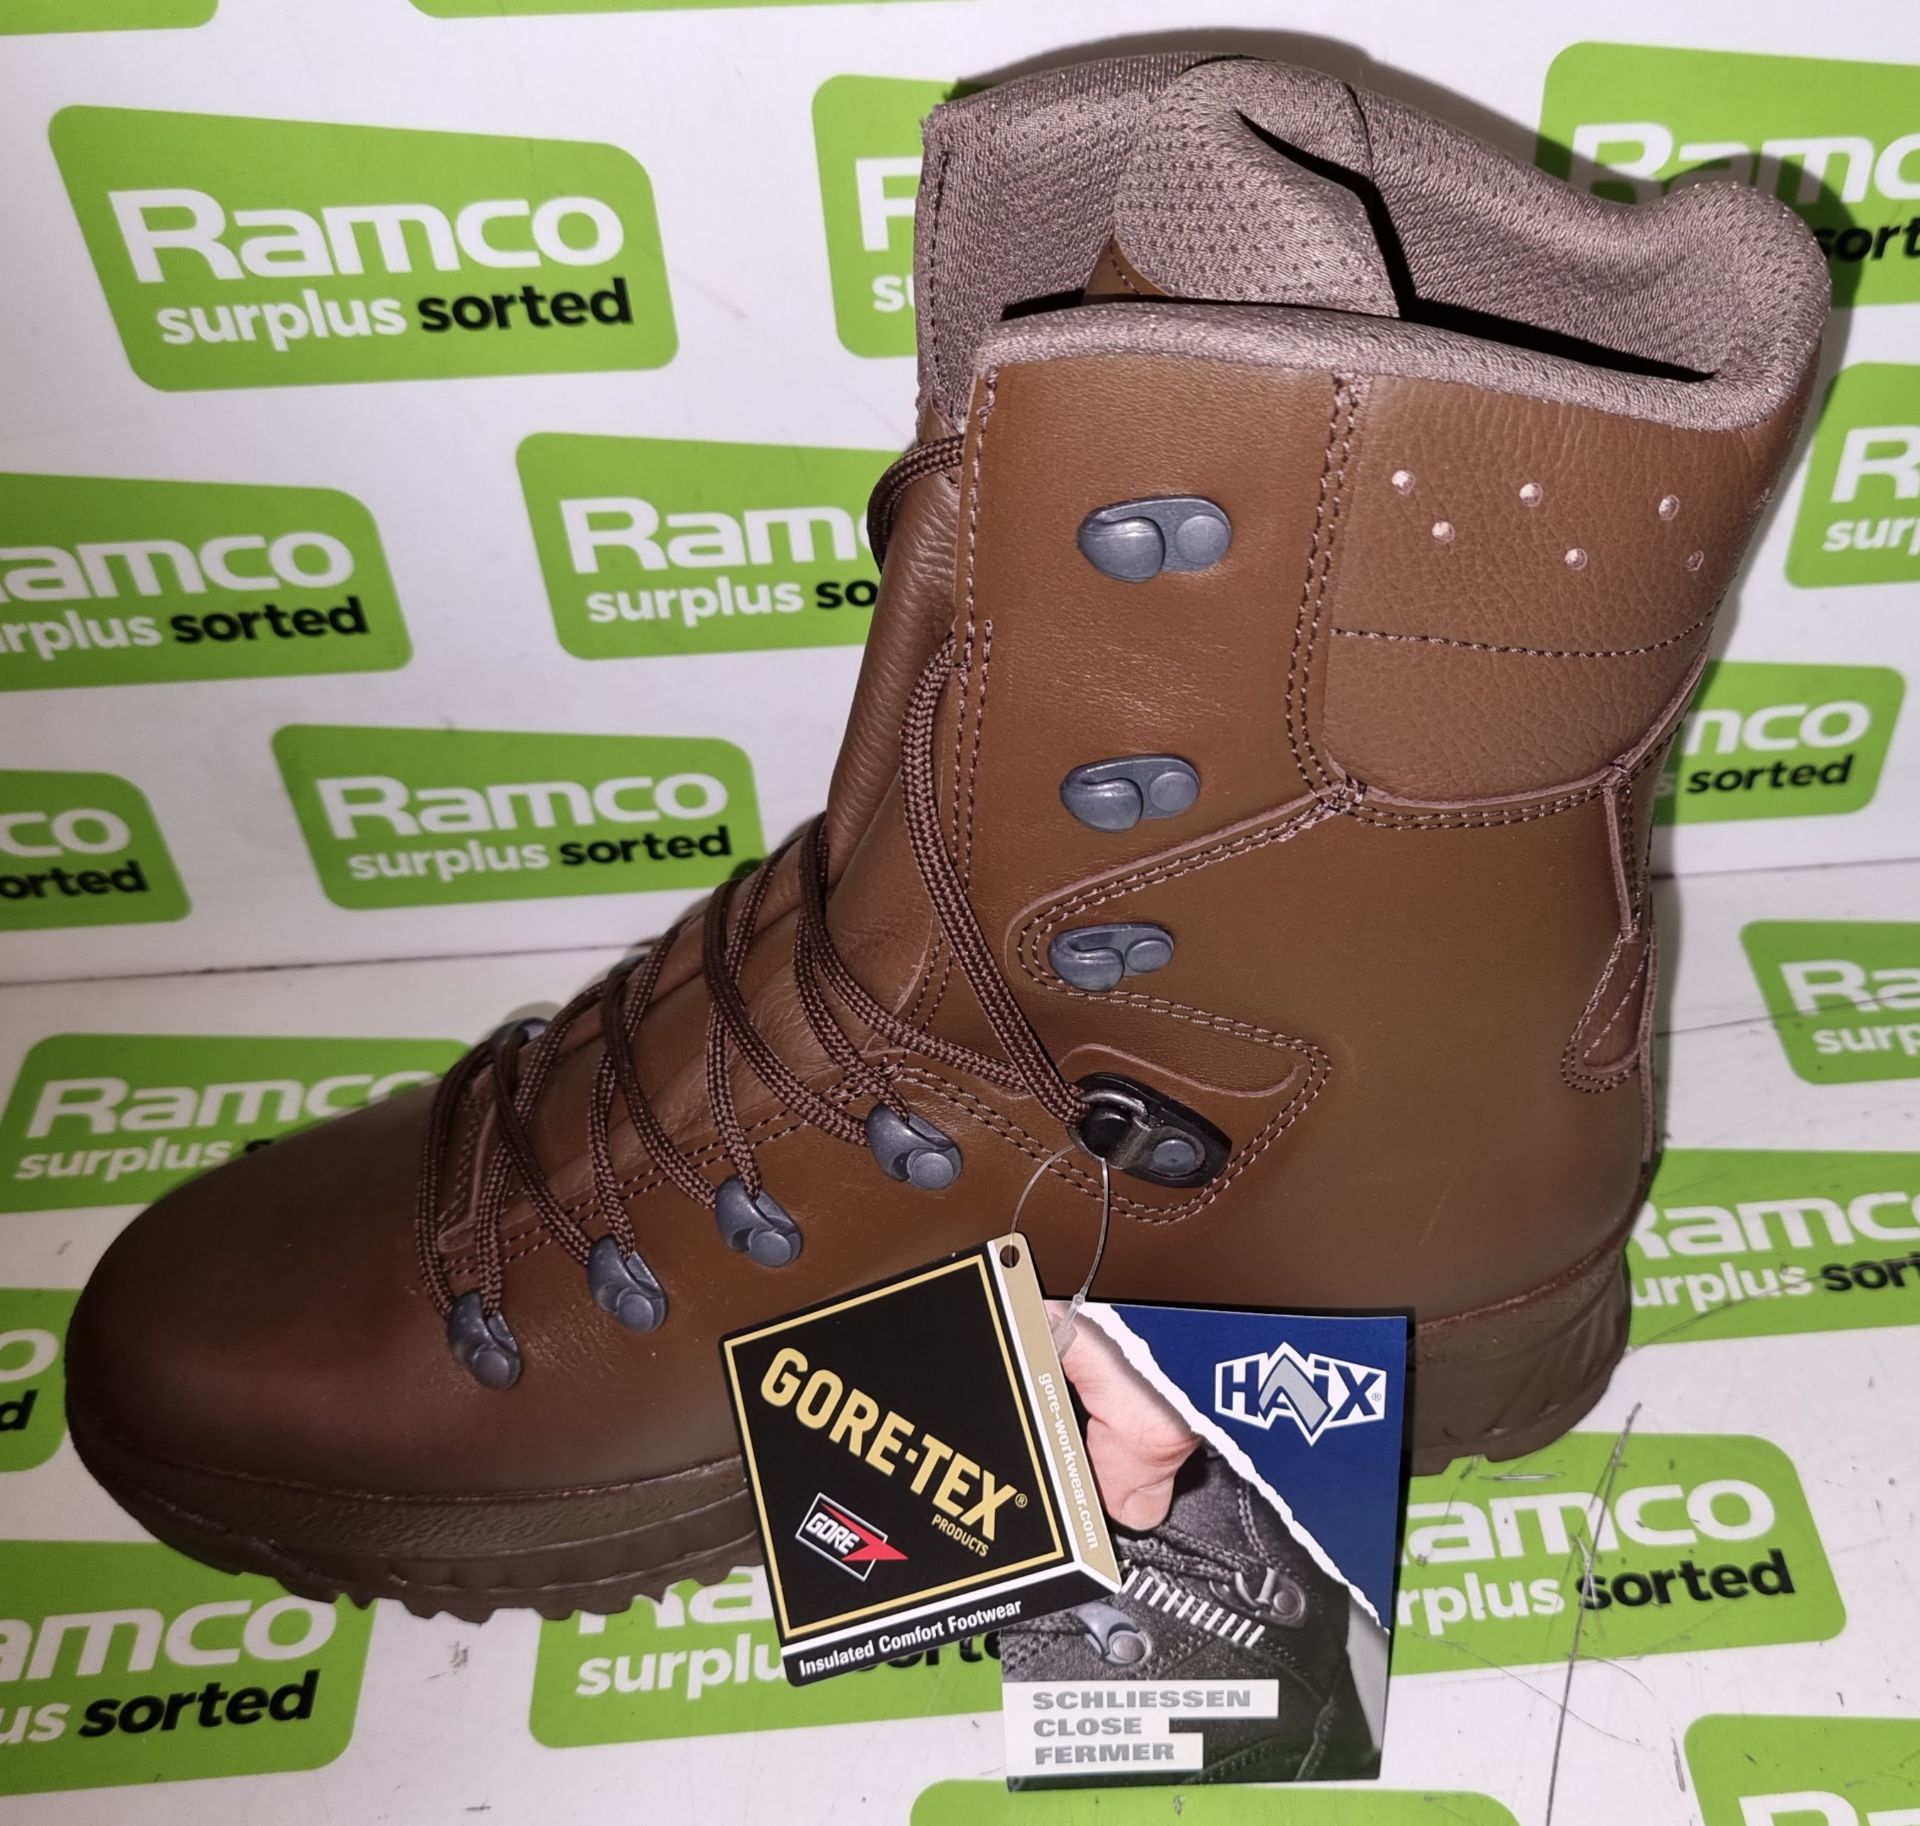 5x pairs of Haix cold wet weather boots - Size 10M - Image 3 of 5